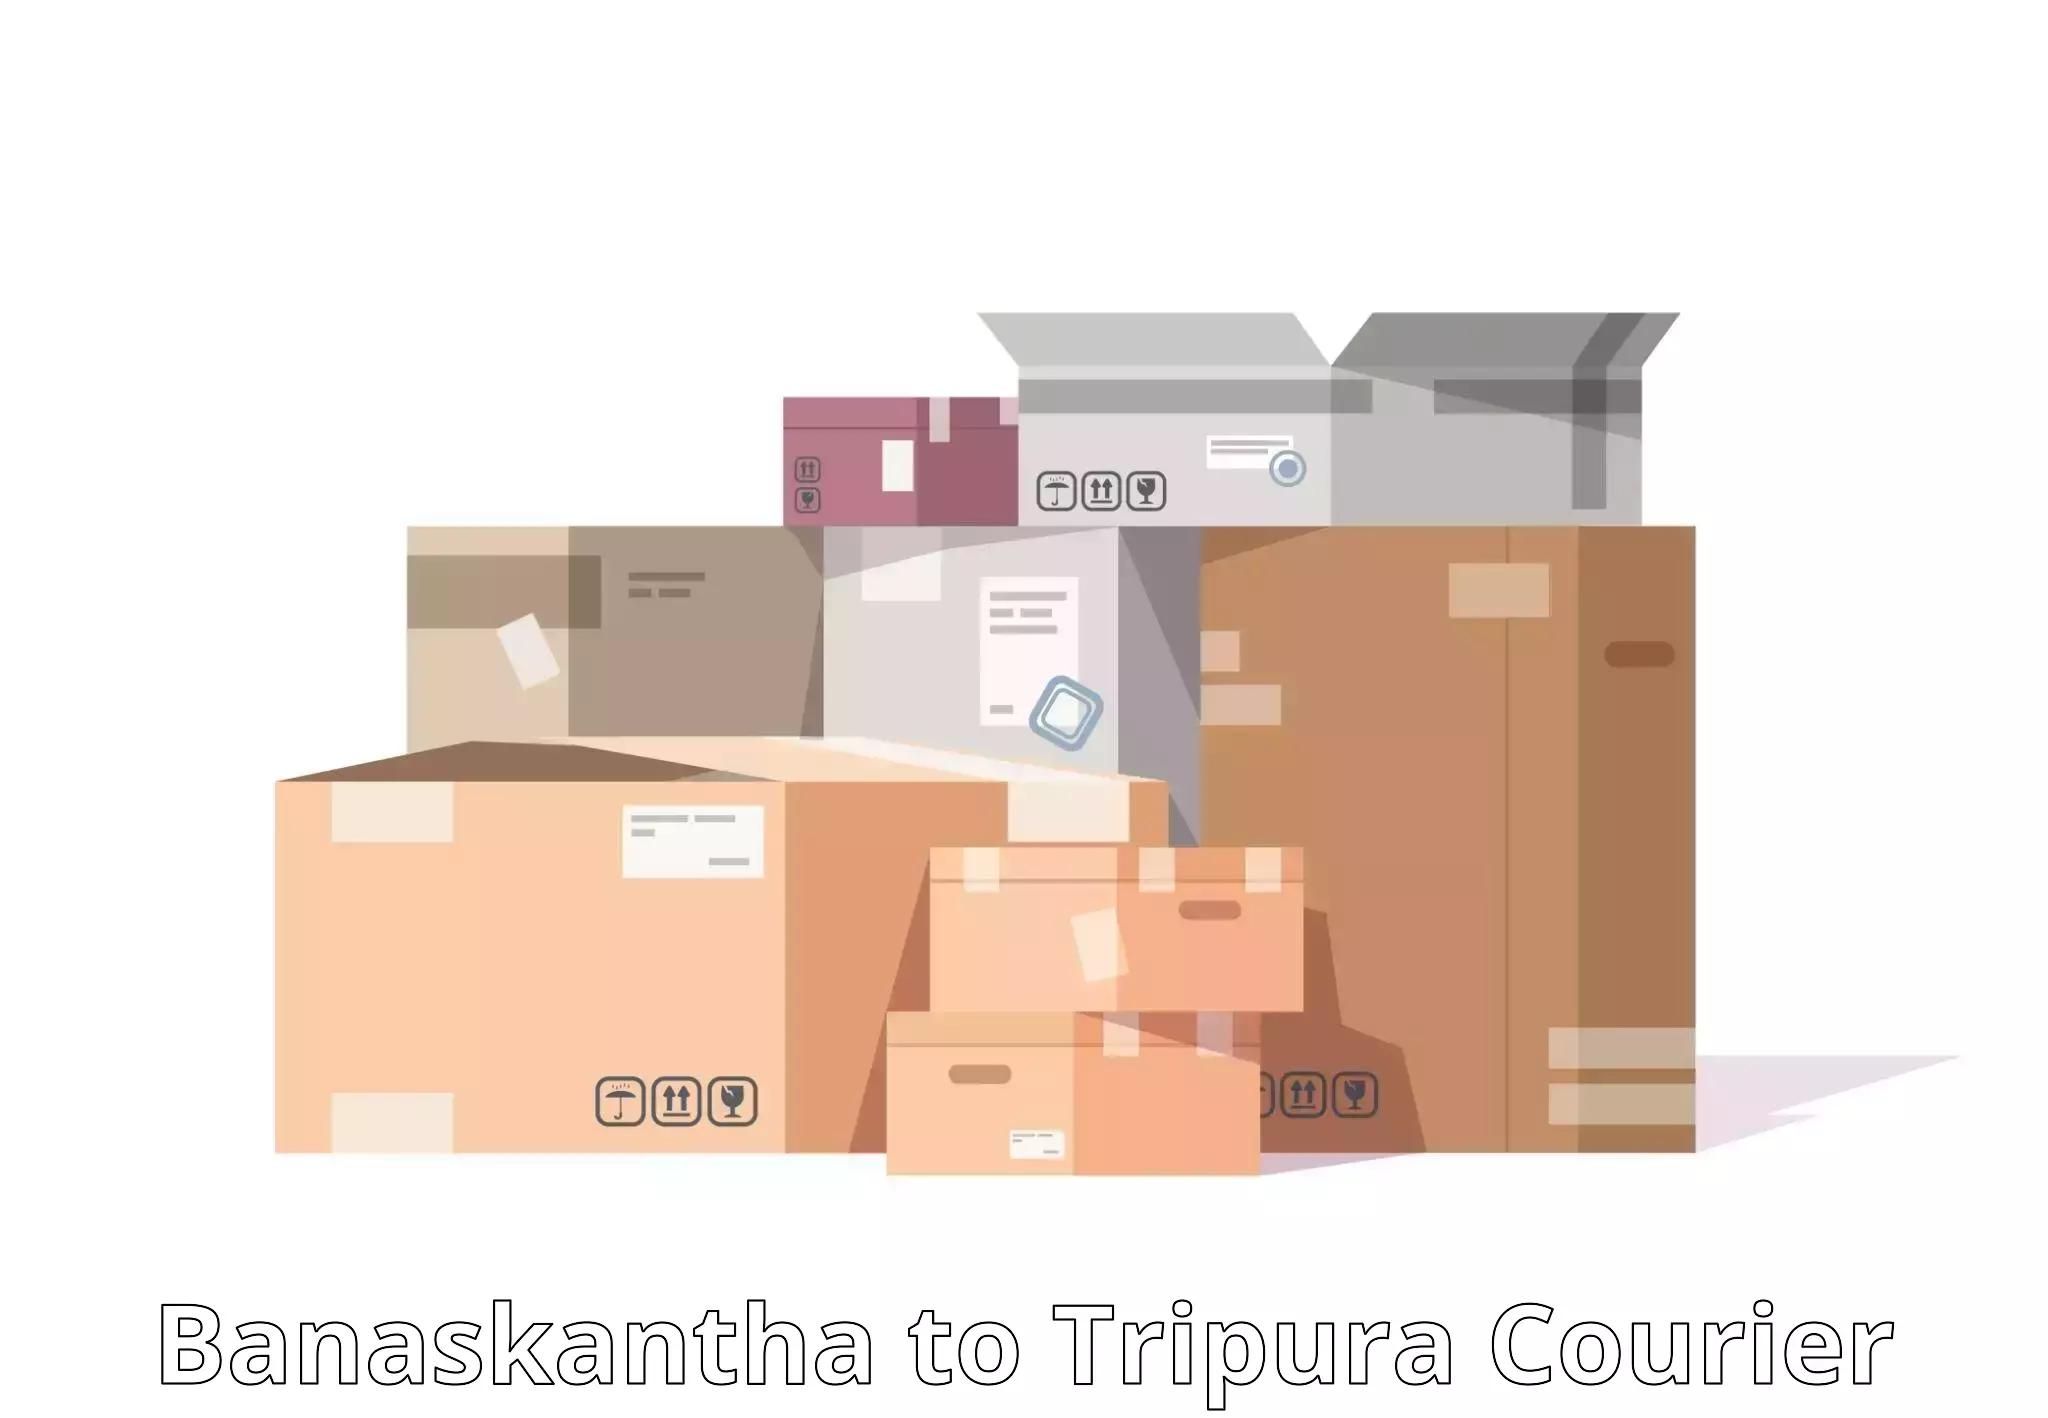 Tailored delivery services Banaskantha to Udaipur Tripura